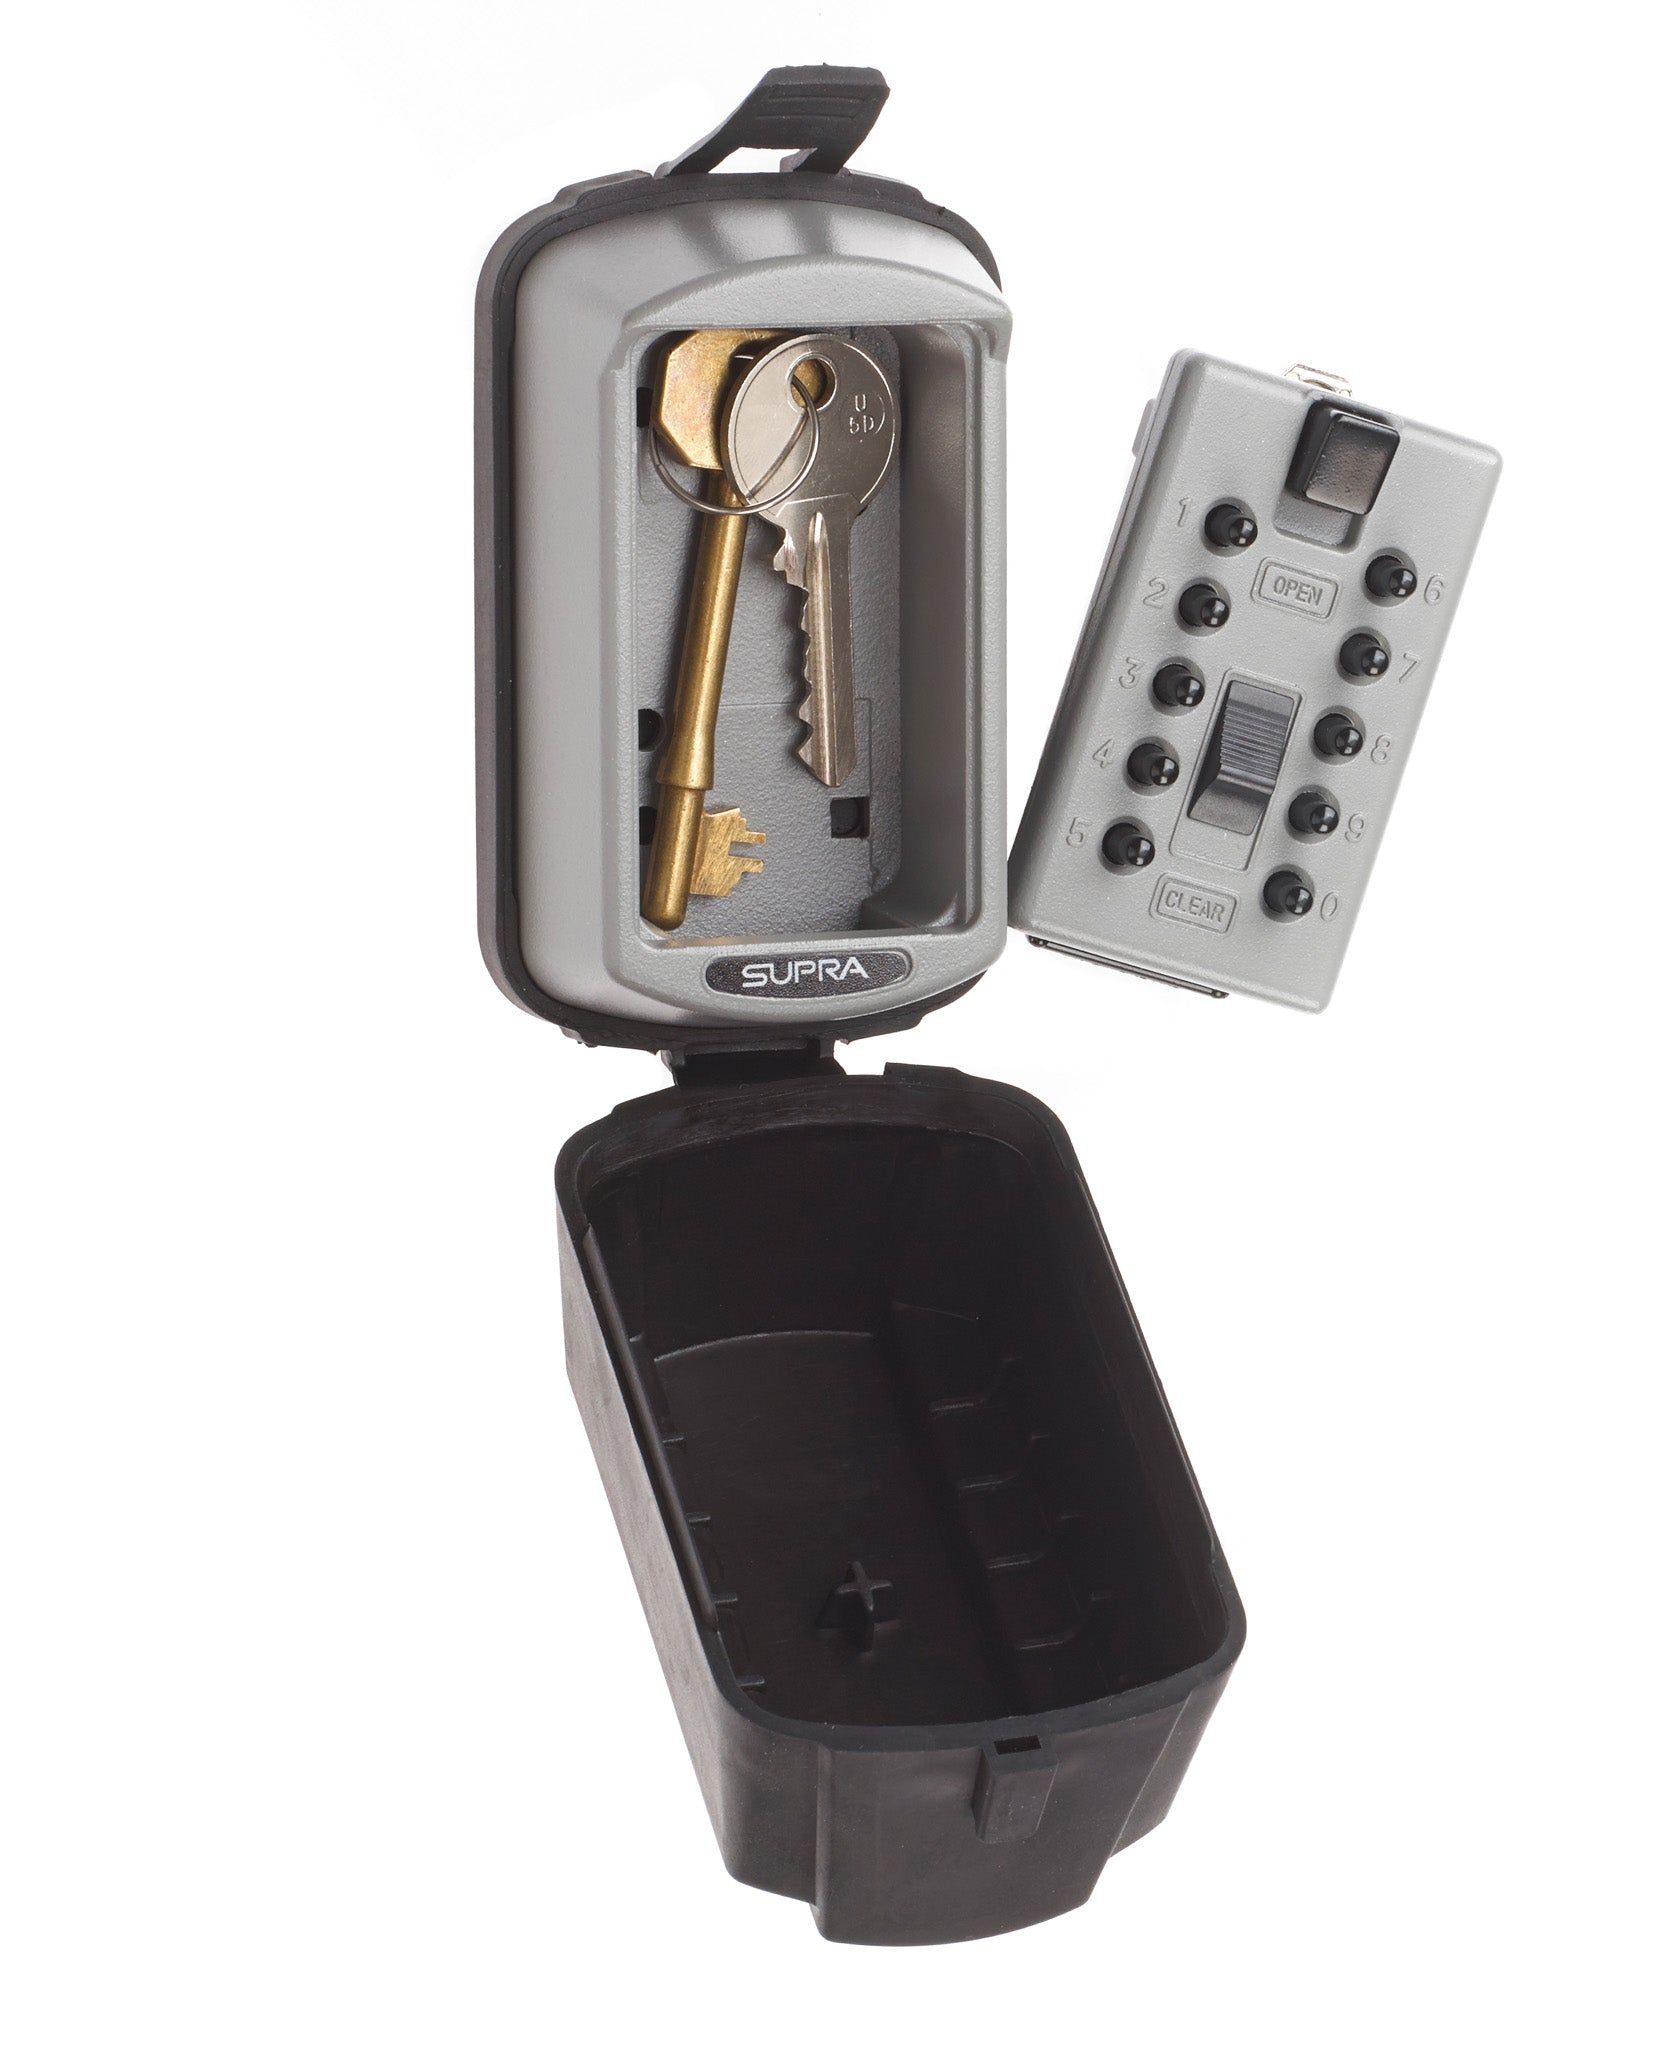 Open Supra S6 slimline key safe with detachable front, 2 keys inside and open weather cover